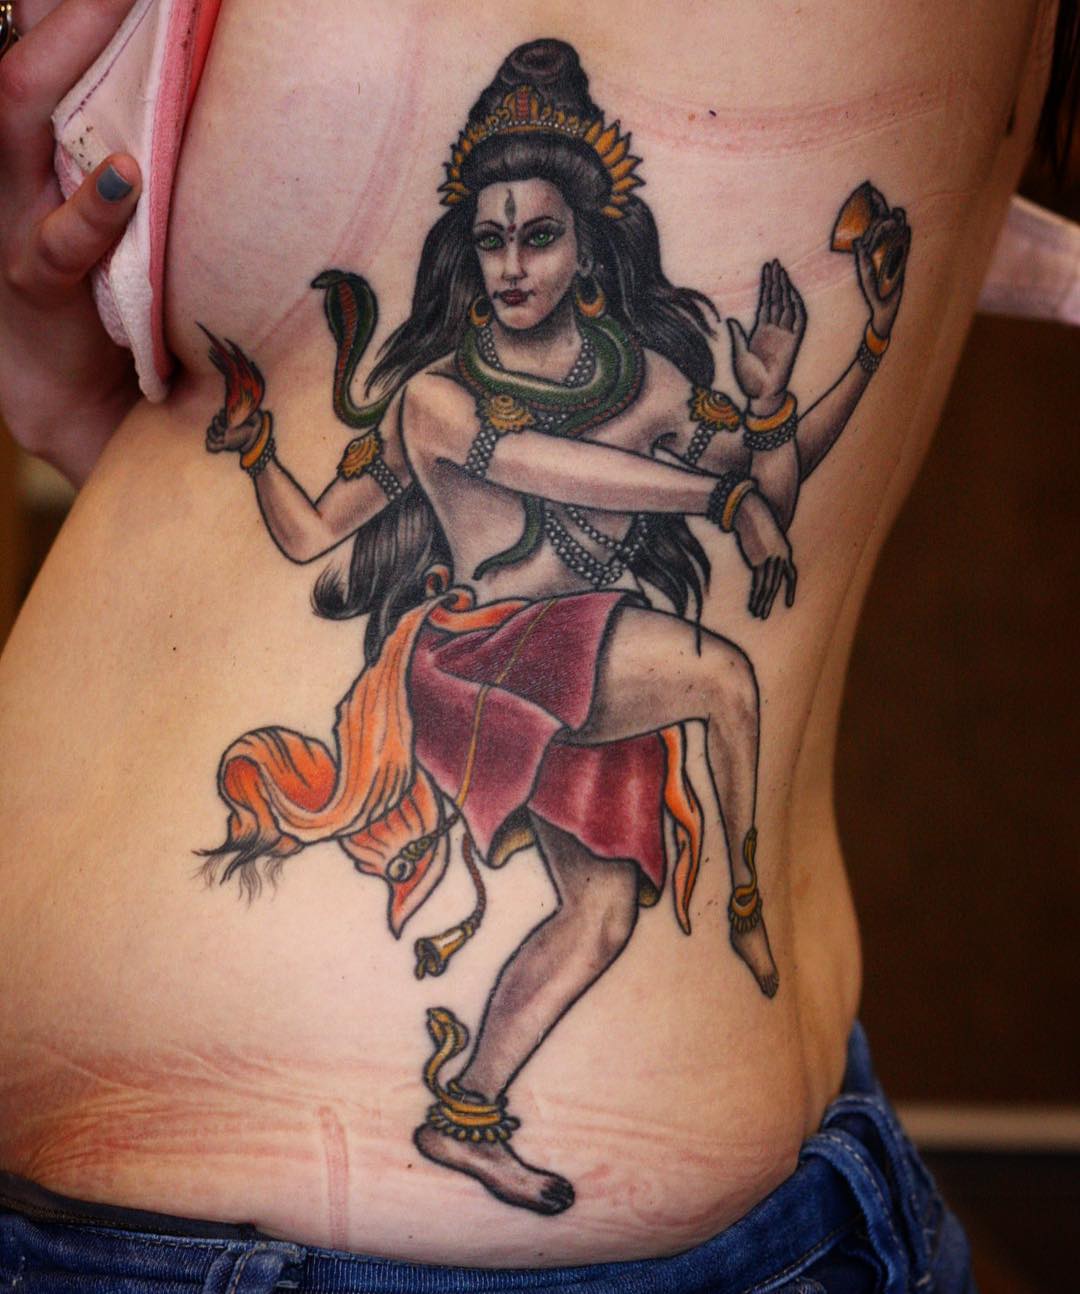 Shiva.
All linework fully healed for more than 4 months, shadings and colours on...